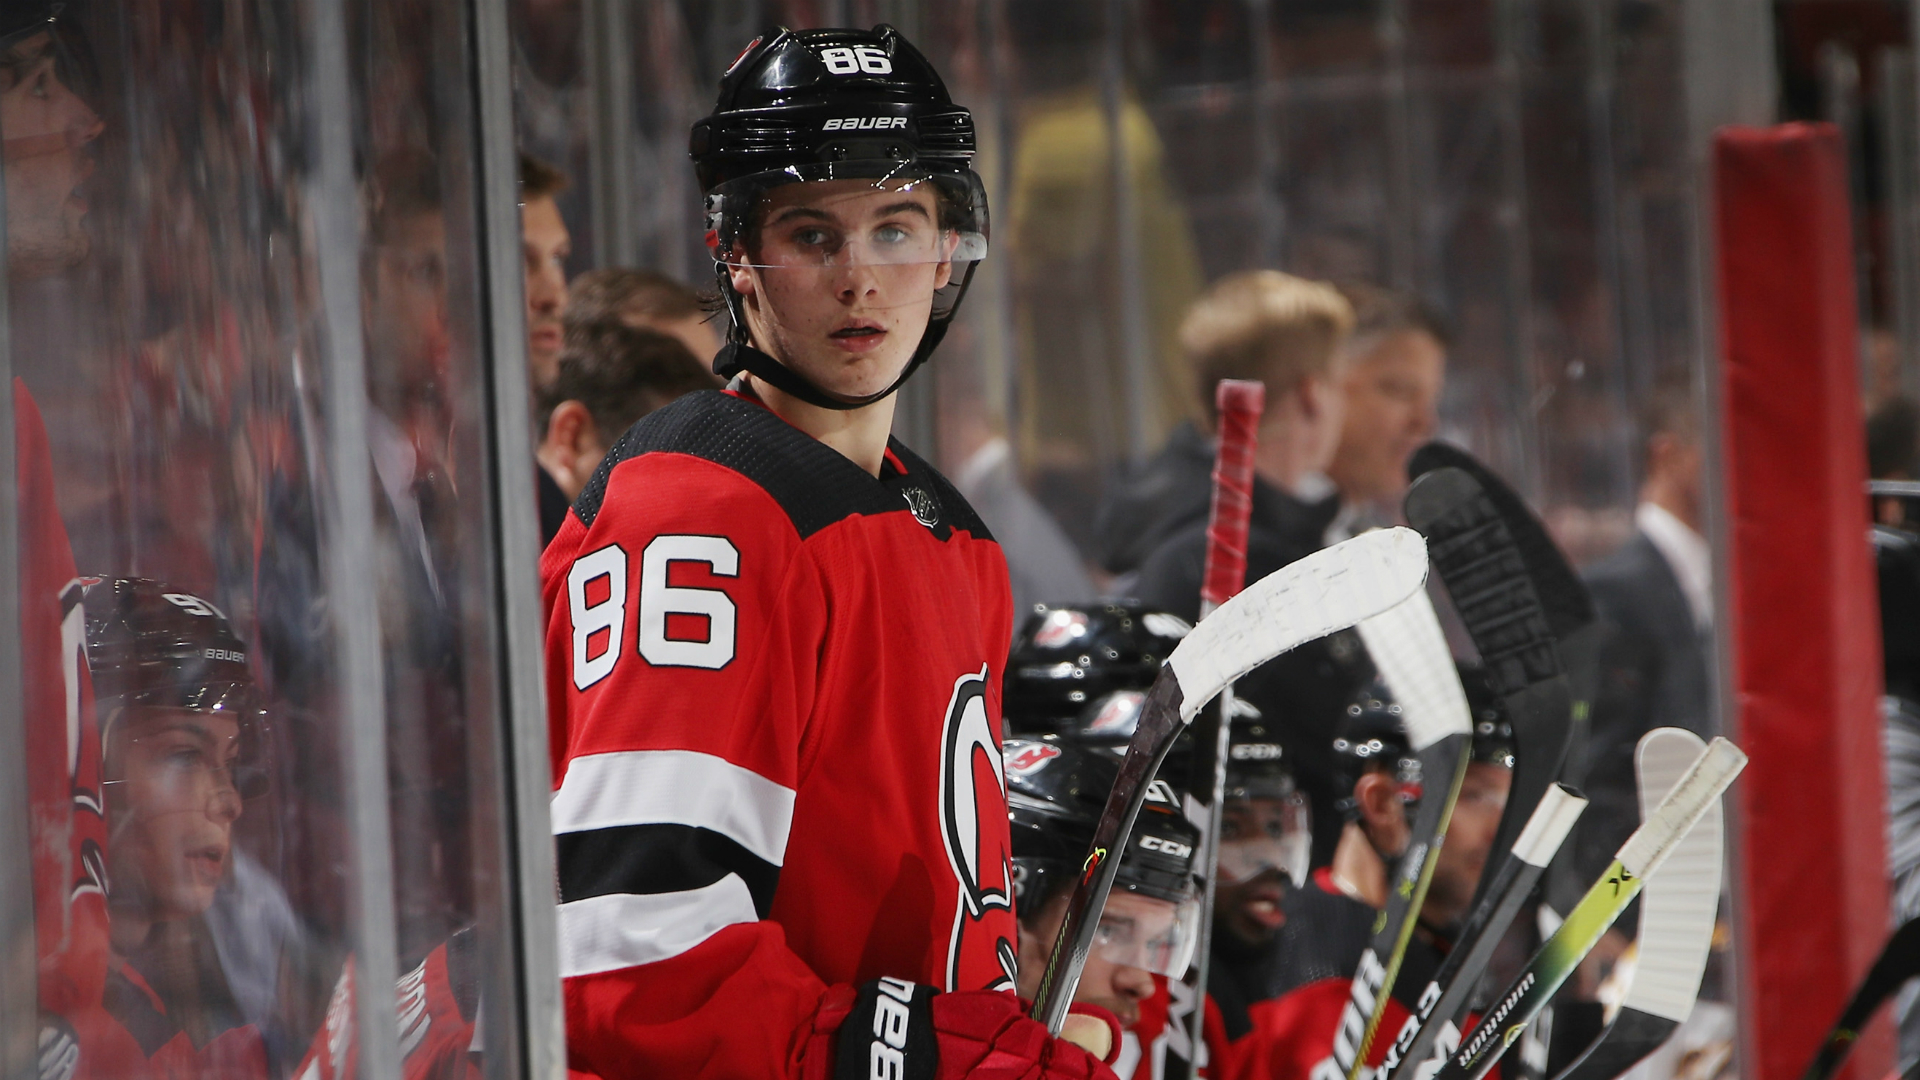 With expectations high, Devils' Jack Hughes up to the task 'It's a